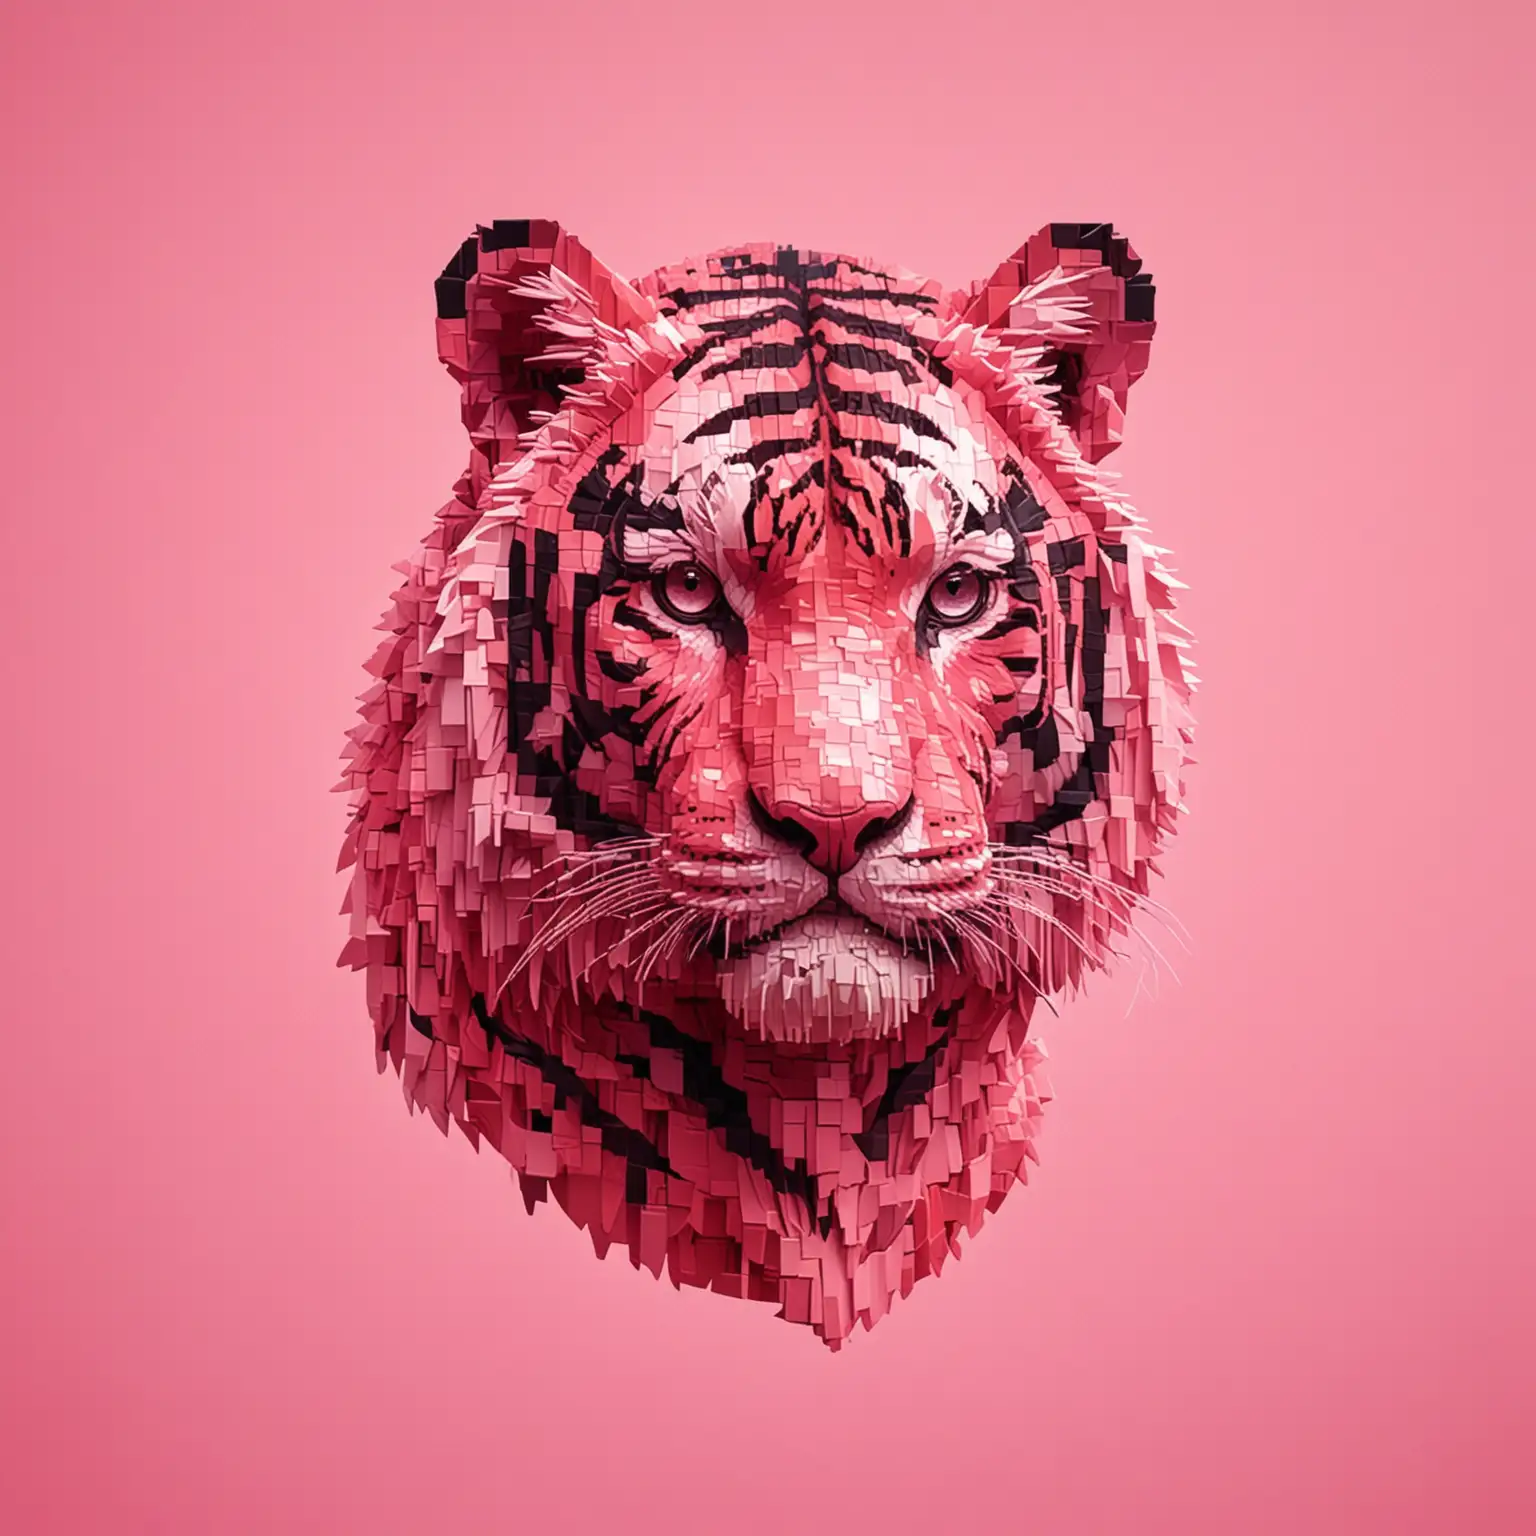 Pixelated Pink Tiger Roaming on Vibrant Pink Background